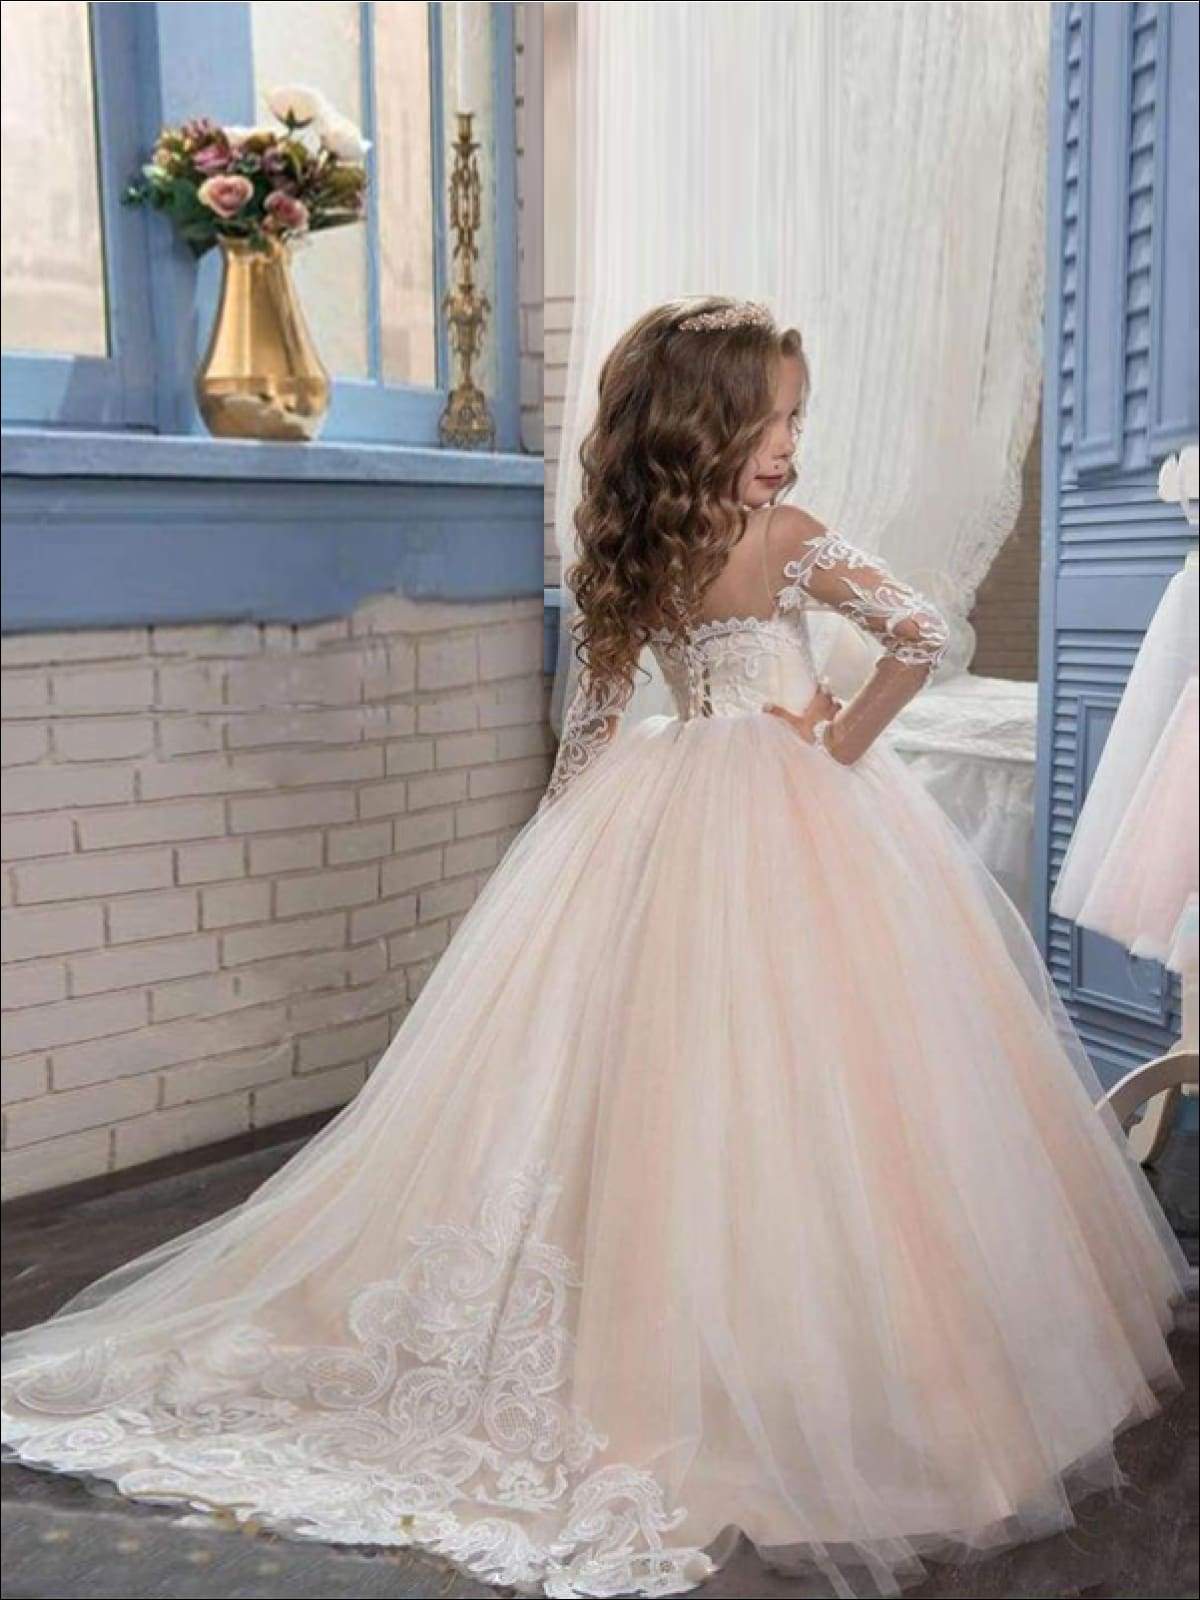  Girls' Special Occasion Dresses - White / Girls